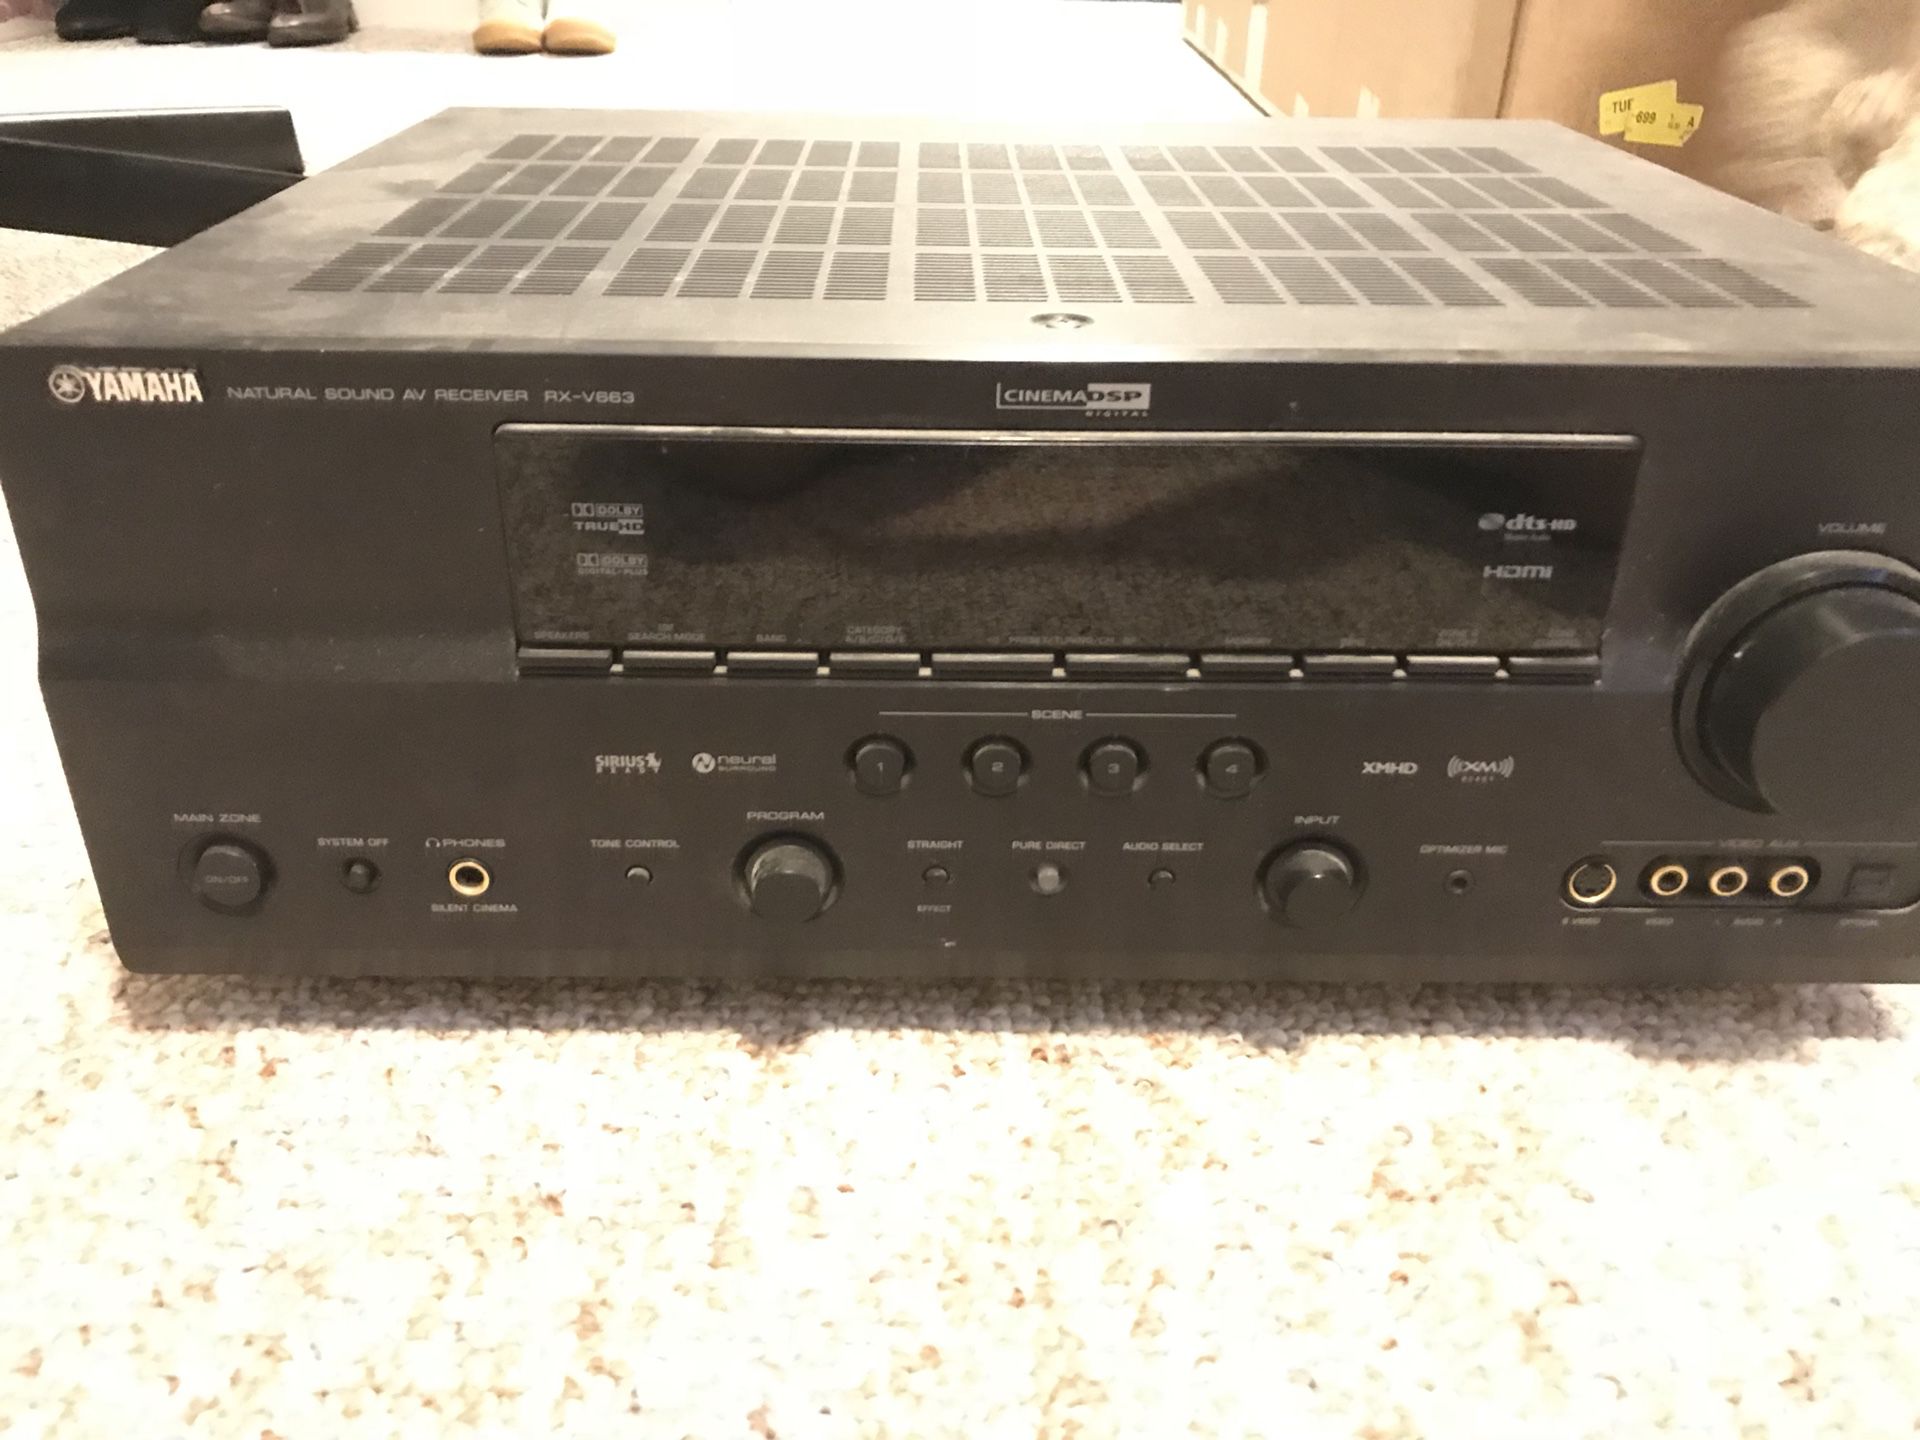 Yamaha RX-V663 Home Audio Theater Receiver